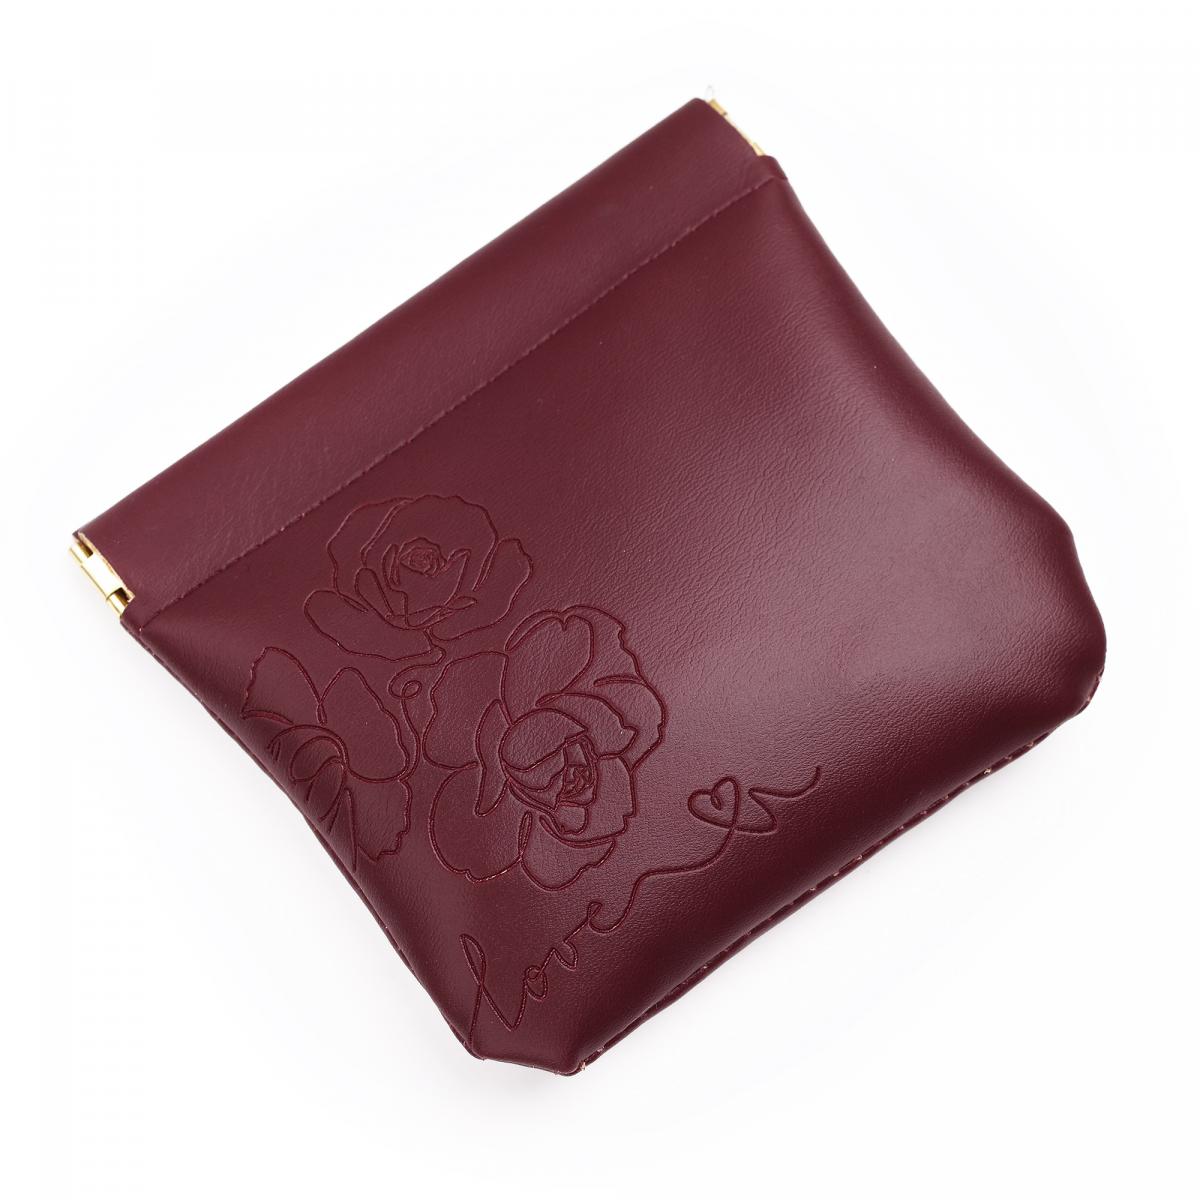 Blossoming Love Burgundy Mini Pouch Gift [NOT FOR SALE]